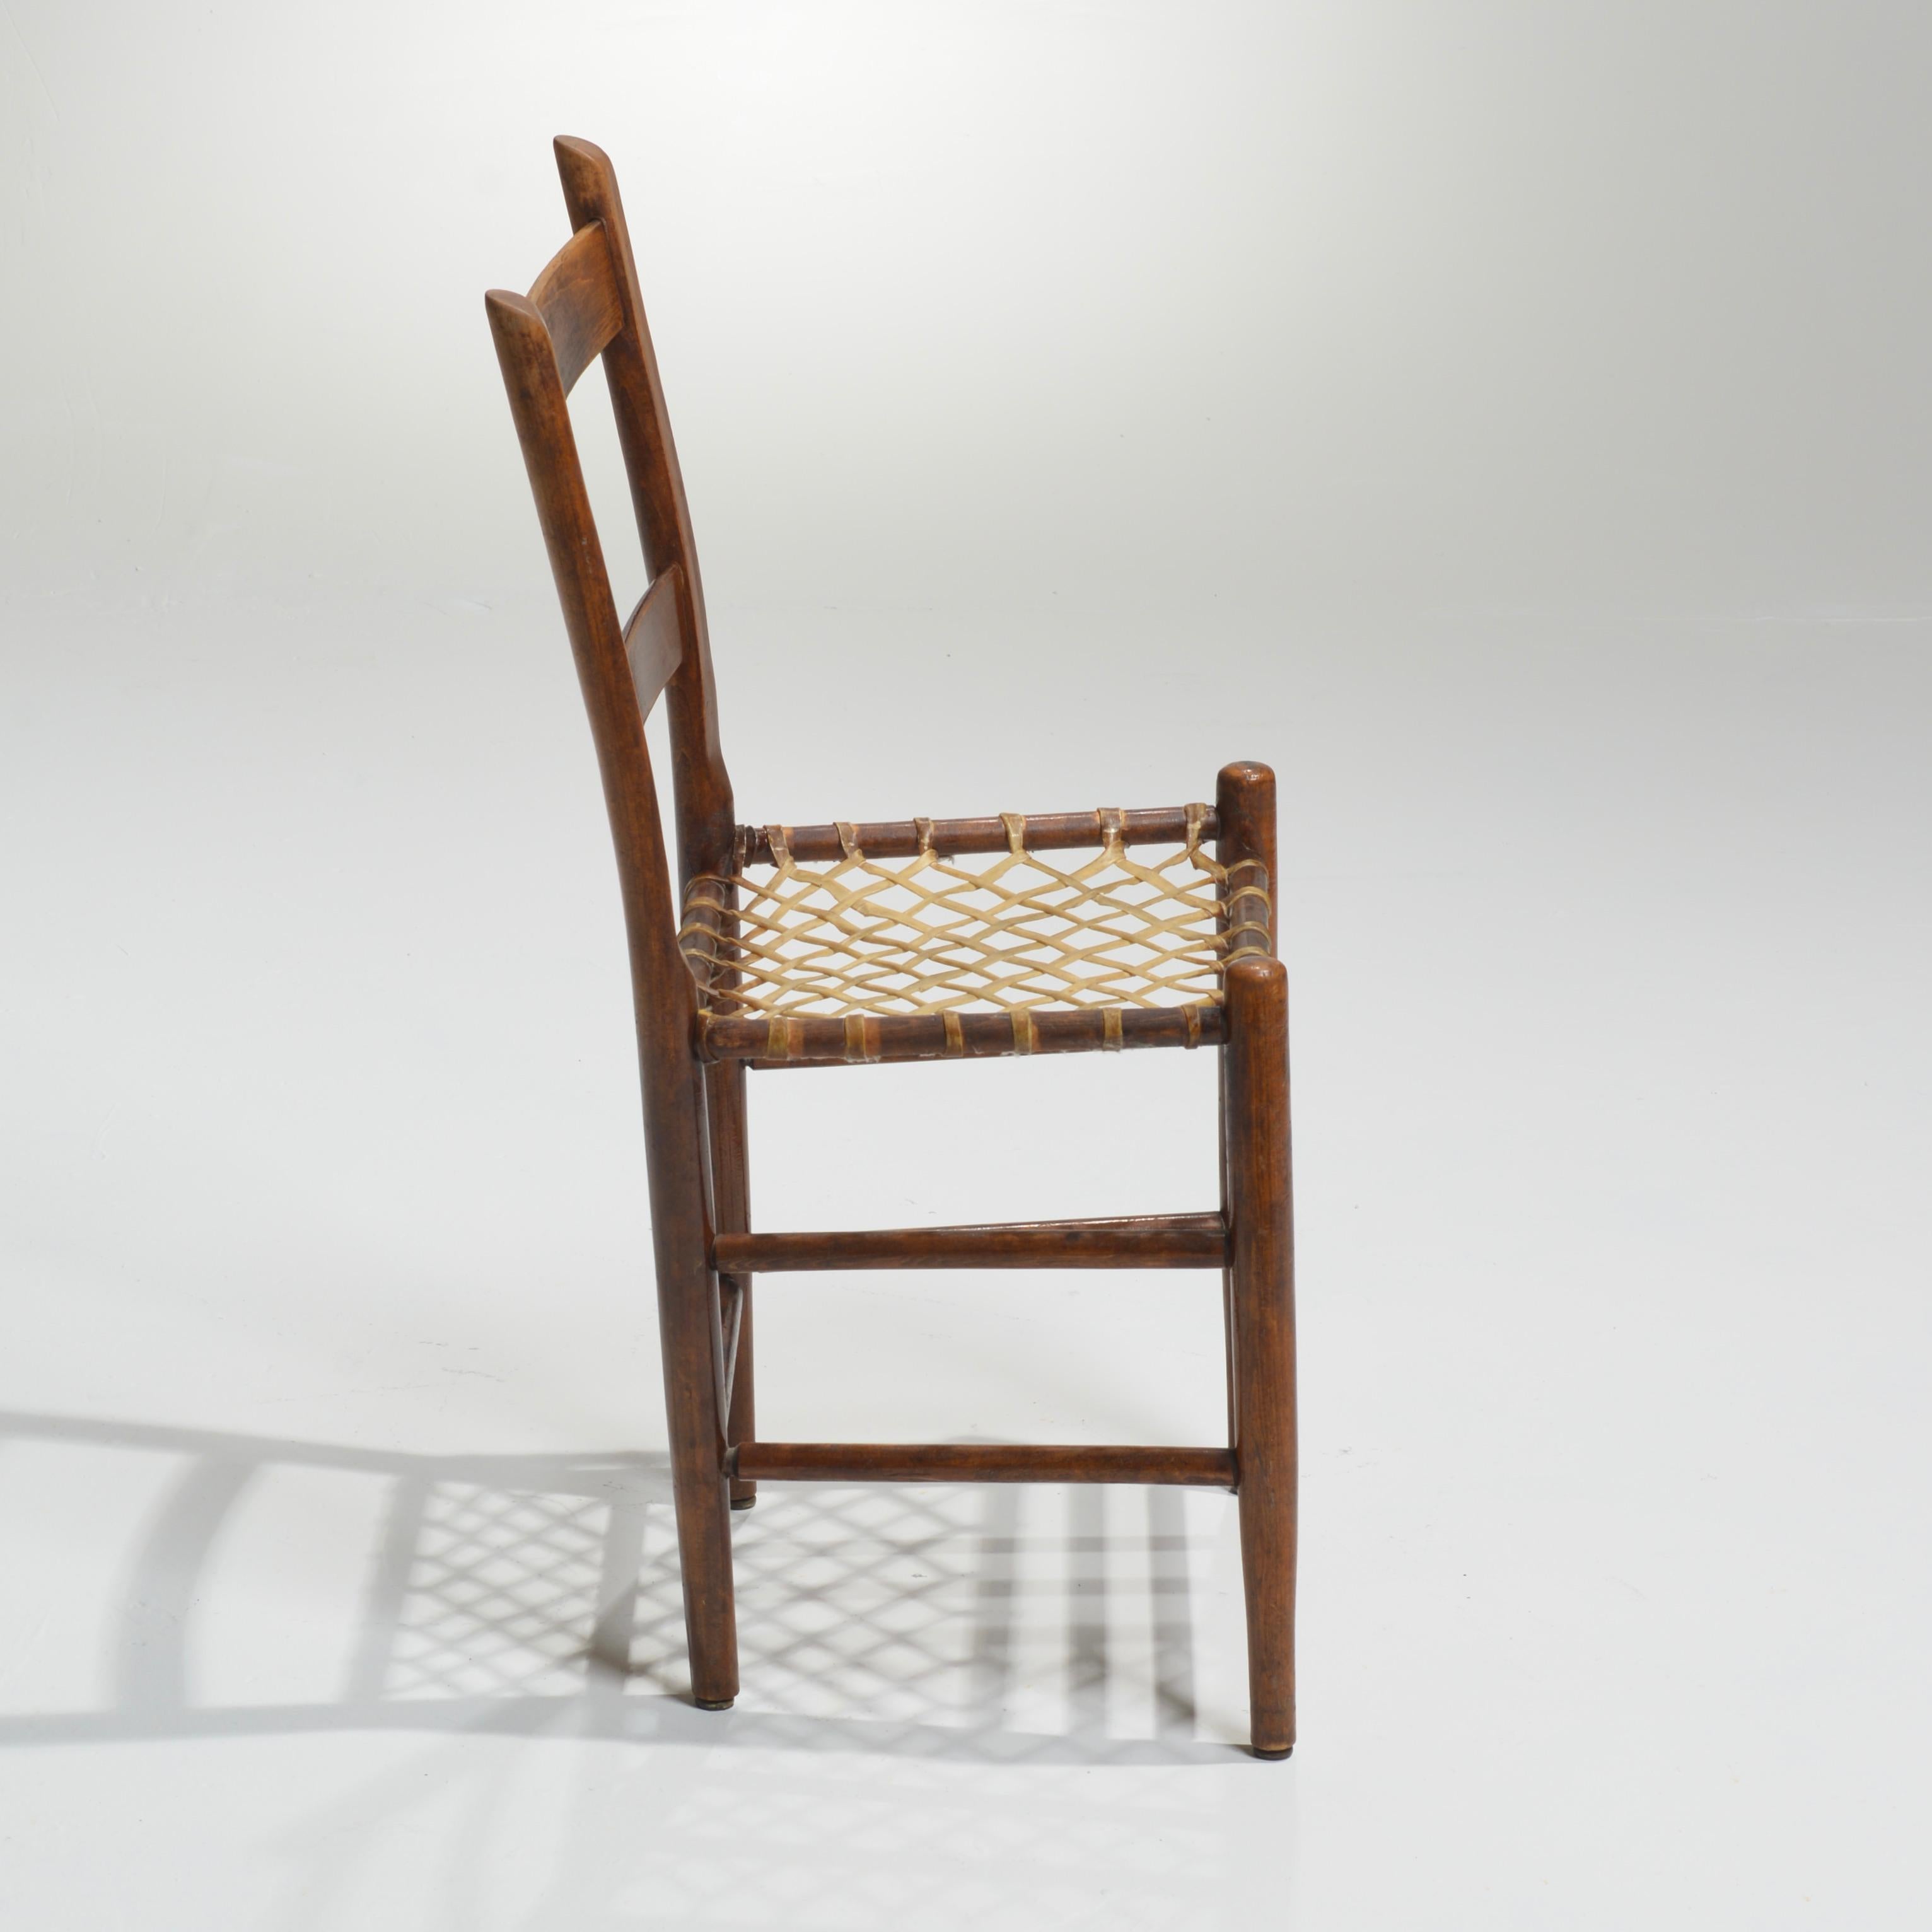 19th Century Rawhide Primitive Chairs, c. 1850 For Sale 3